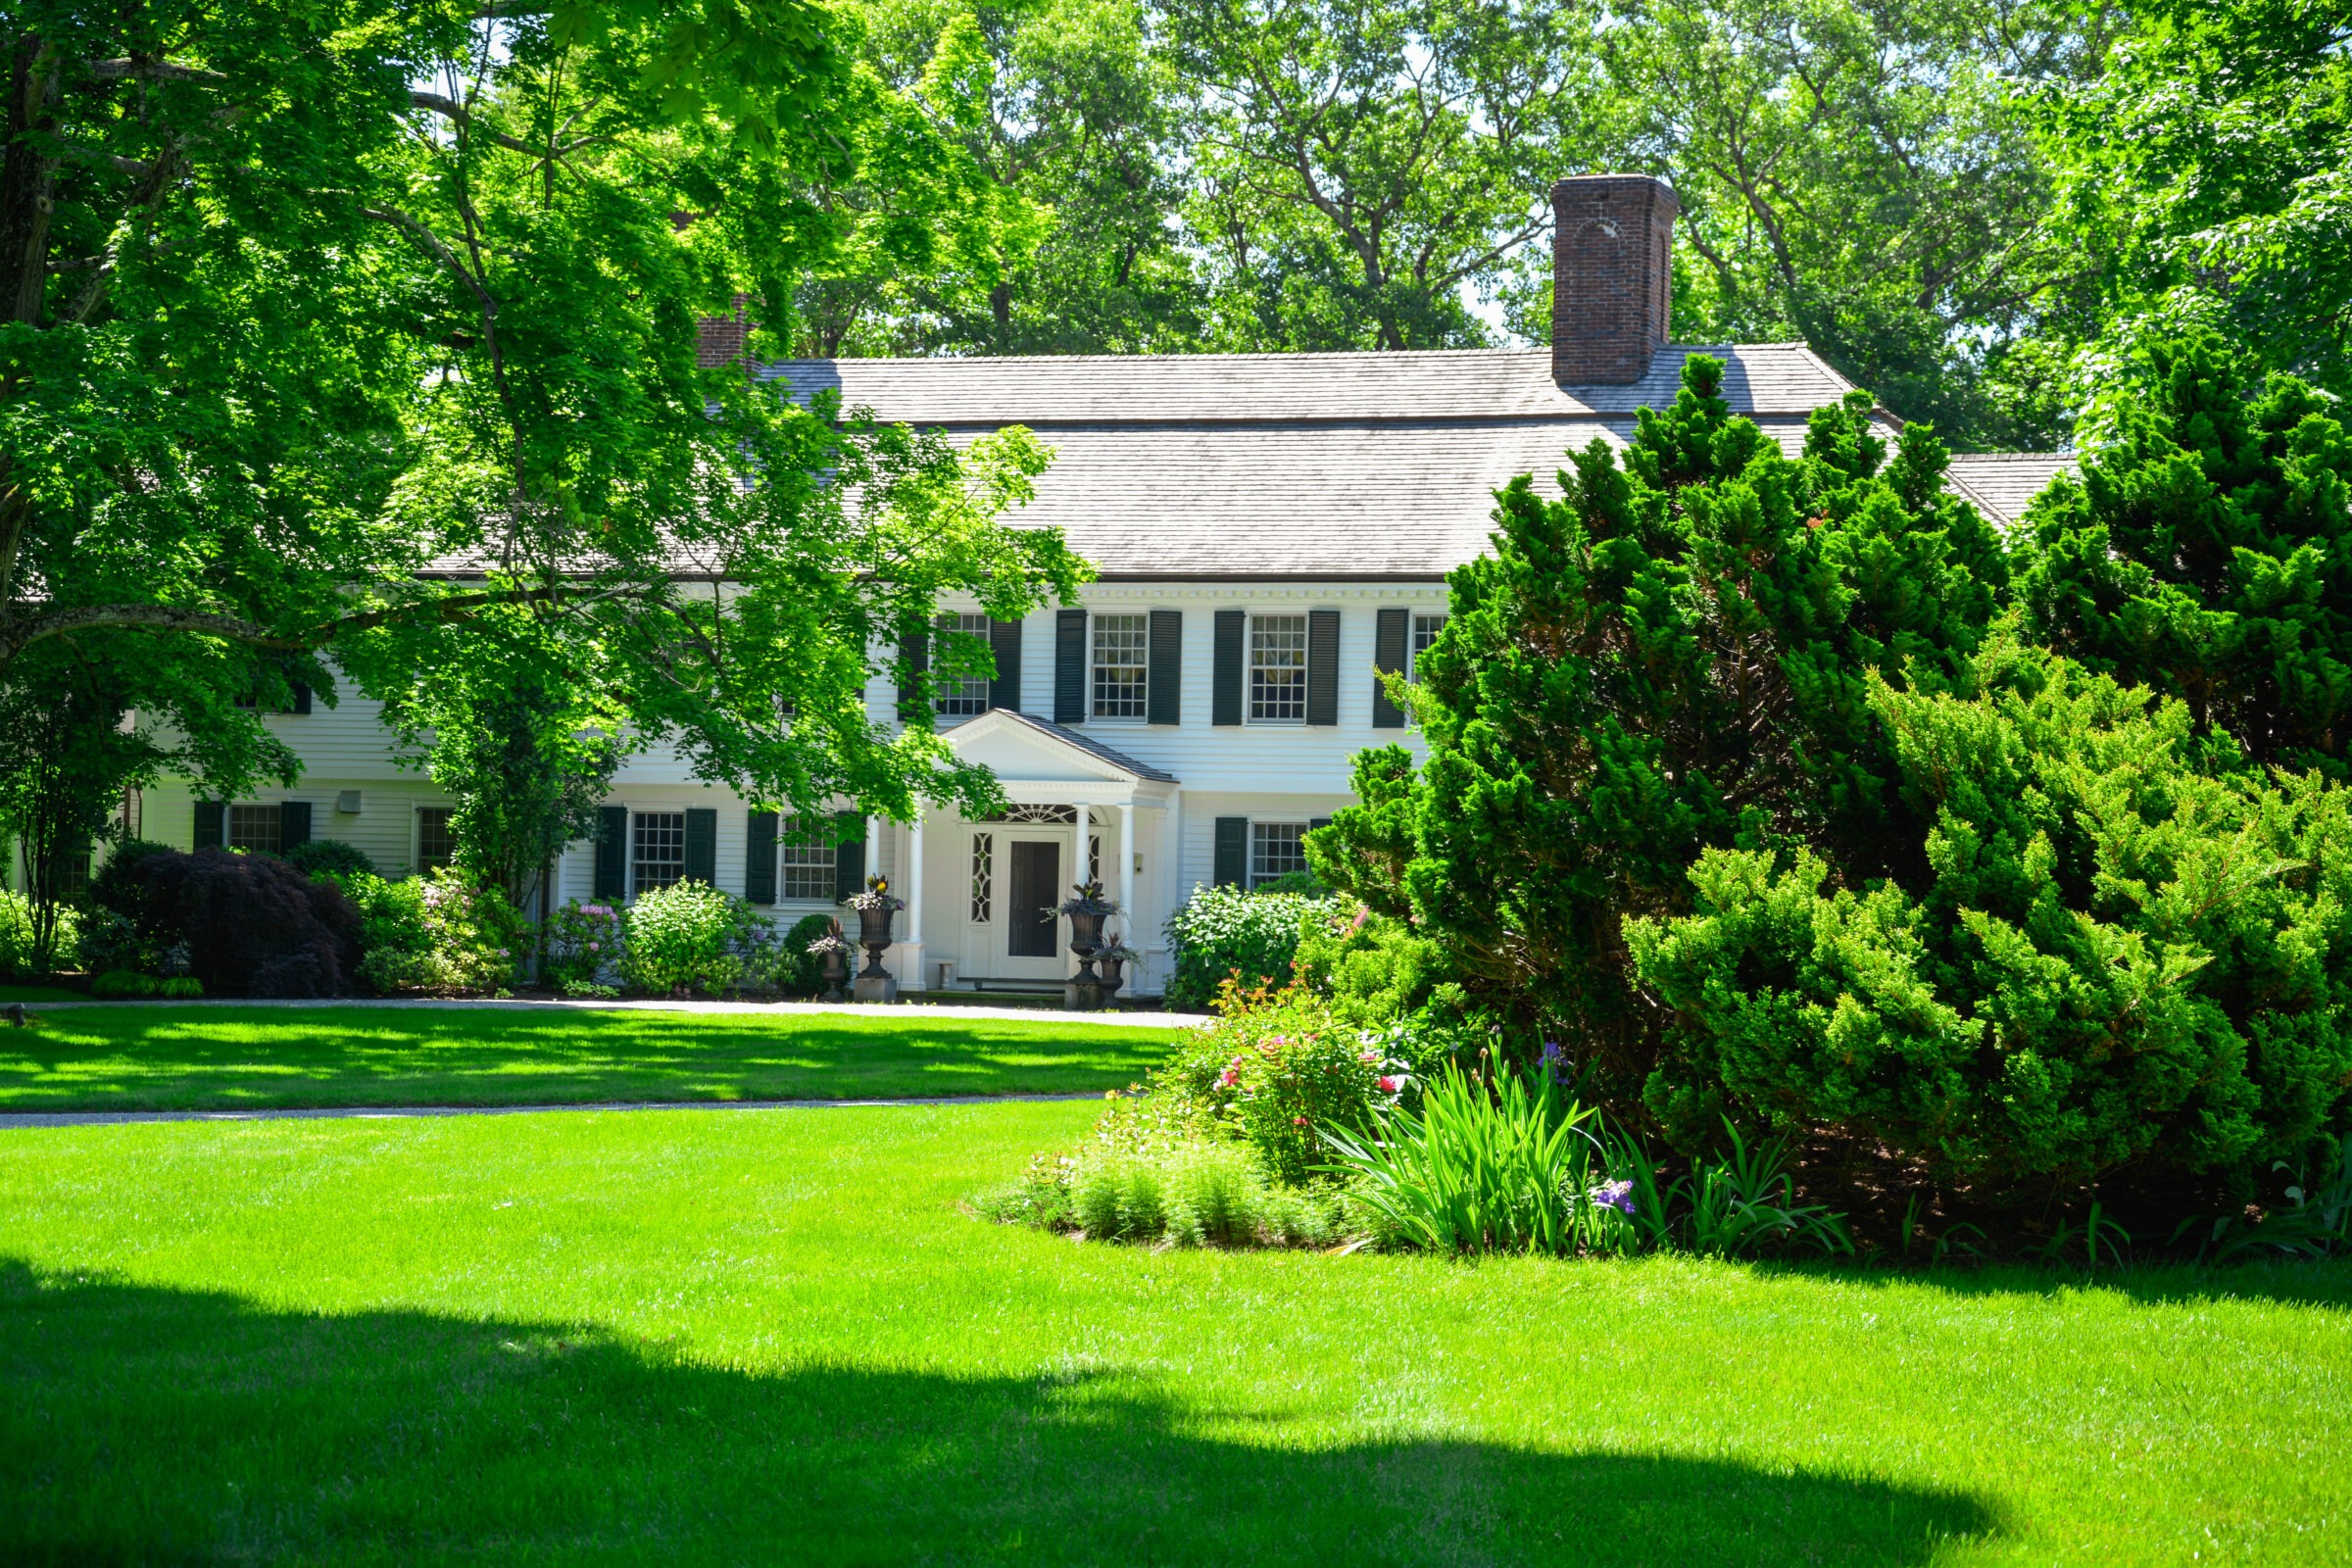 The image displays a traditional two-story white house with green shutters, surrounded by lush greenery, manicured lawn, and bright sunshine.